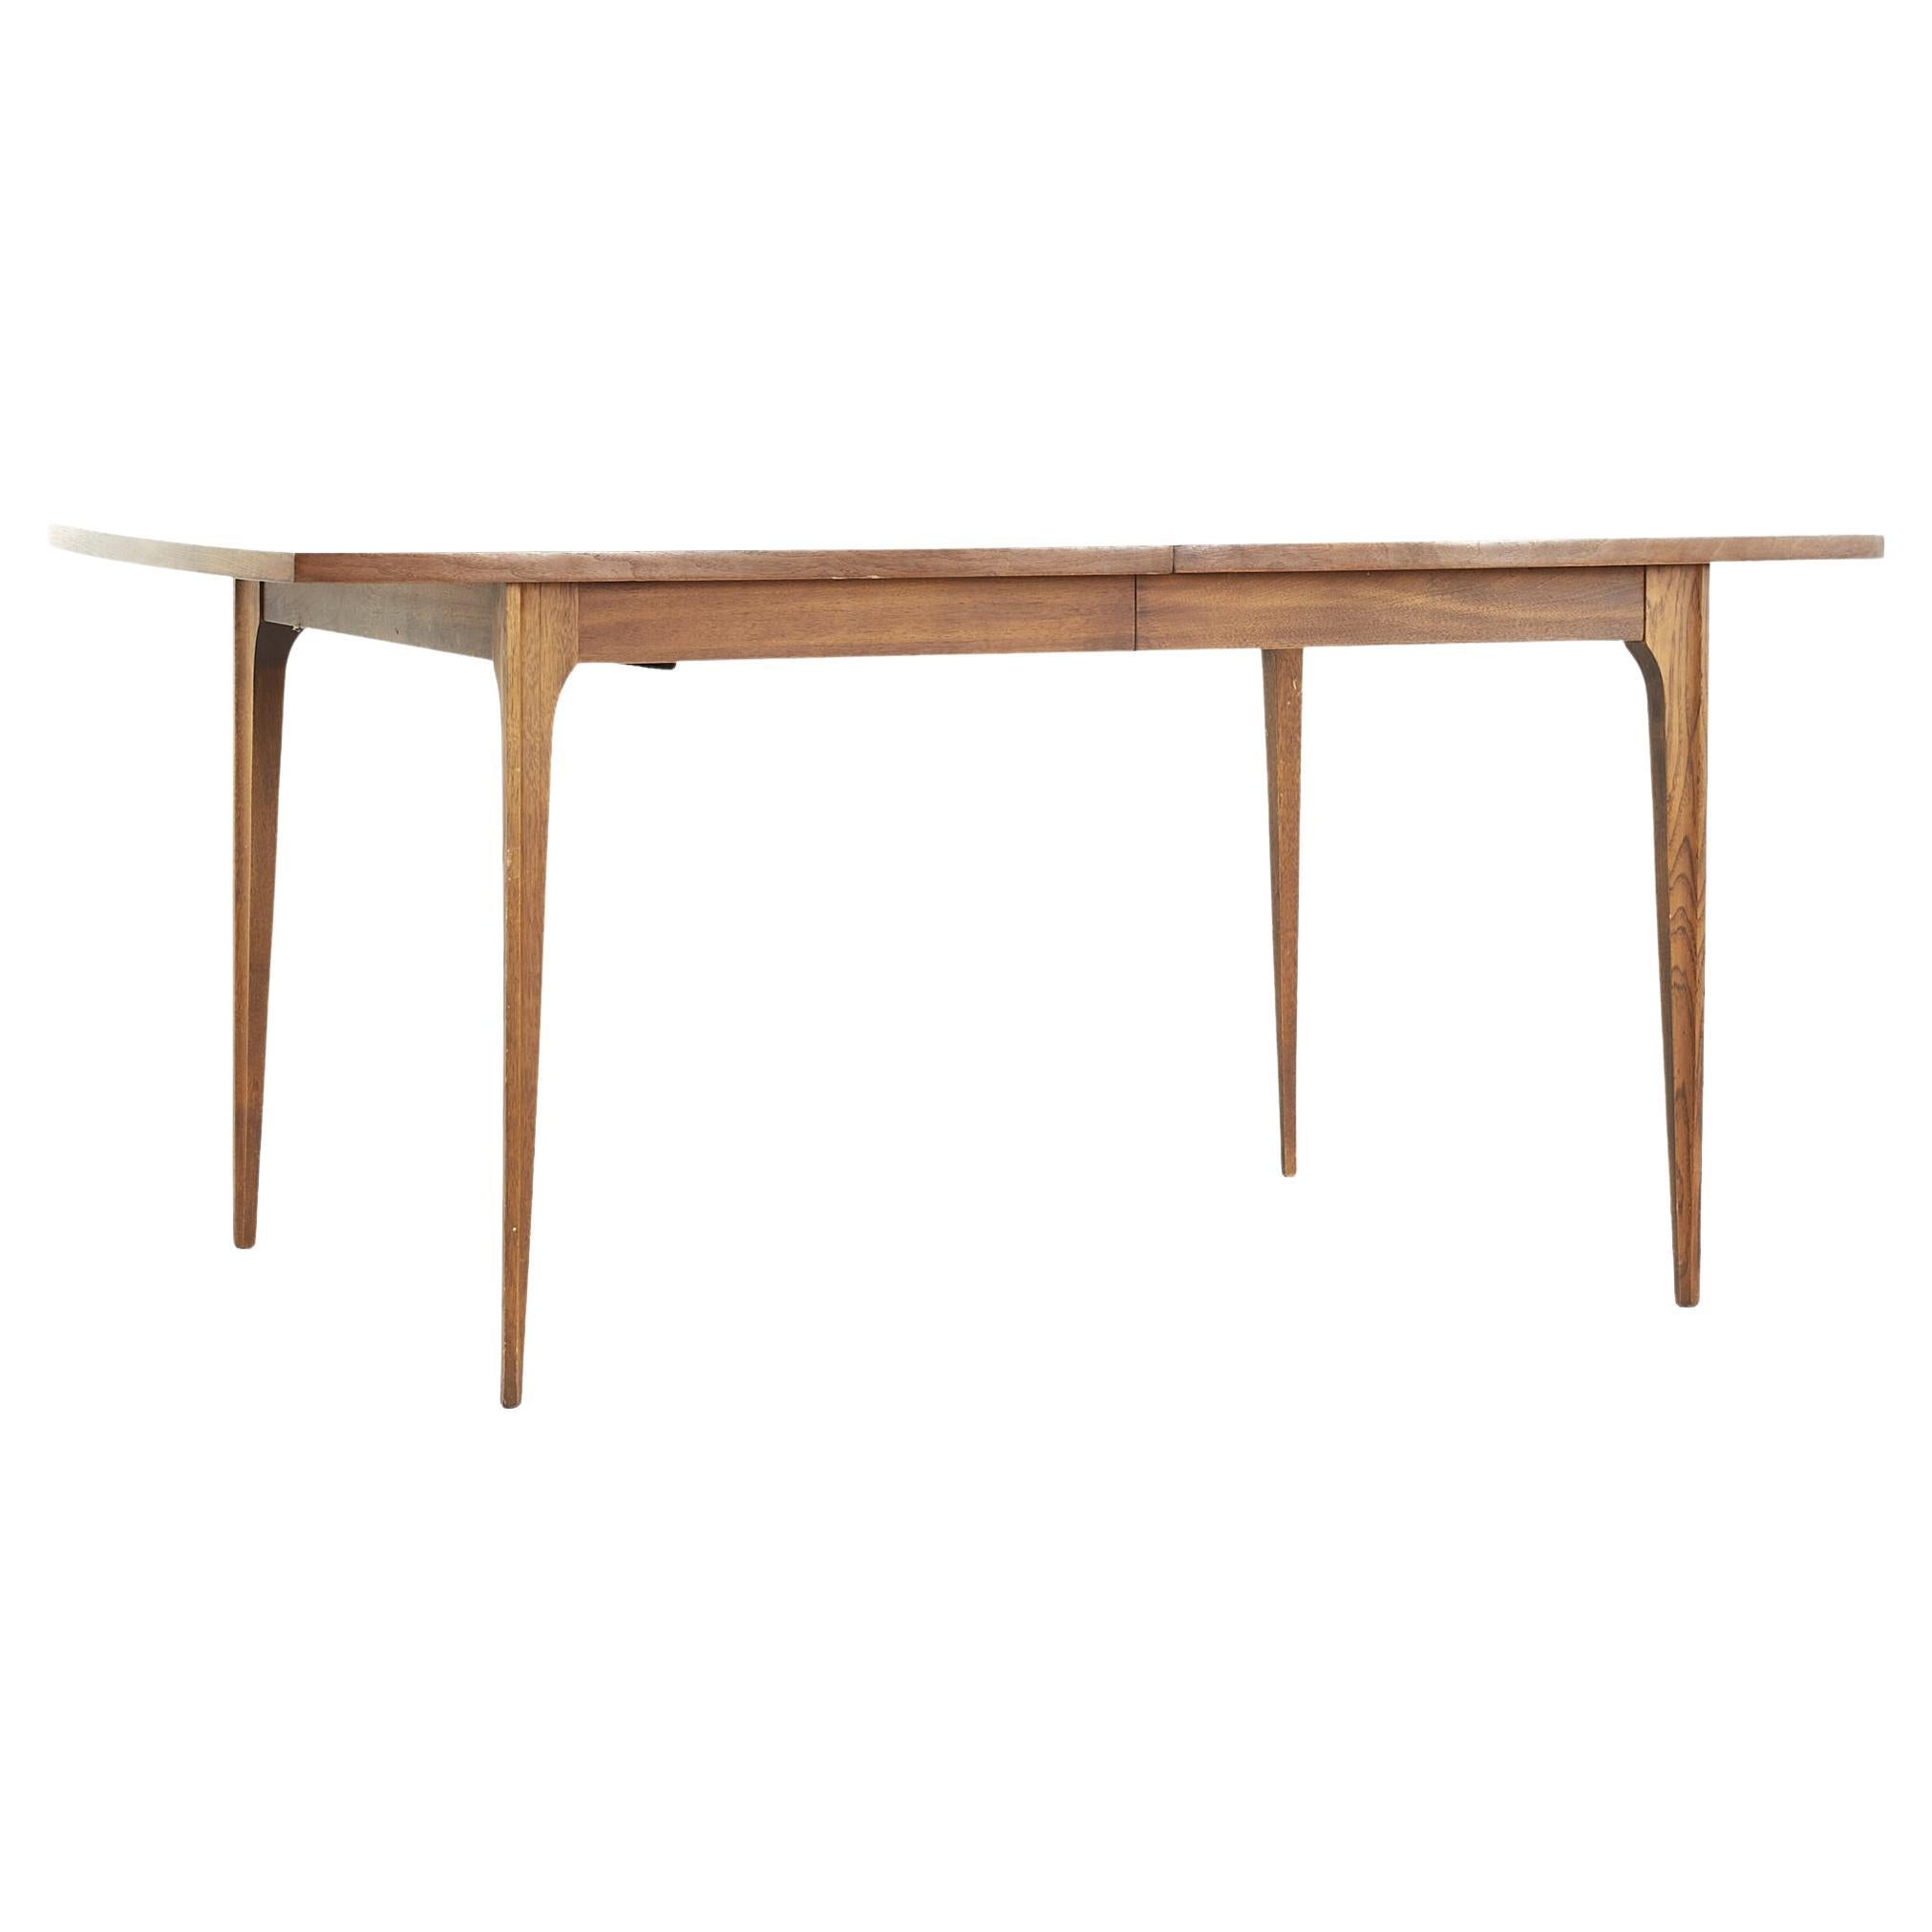 Broyhill Brasilia Midcentury Walnut Dining Table with 1 Leaf For Sale